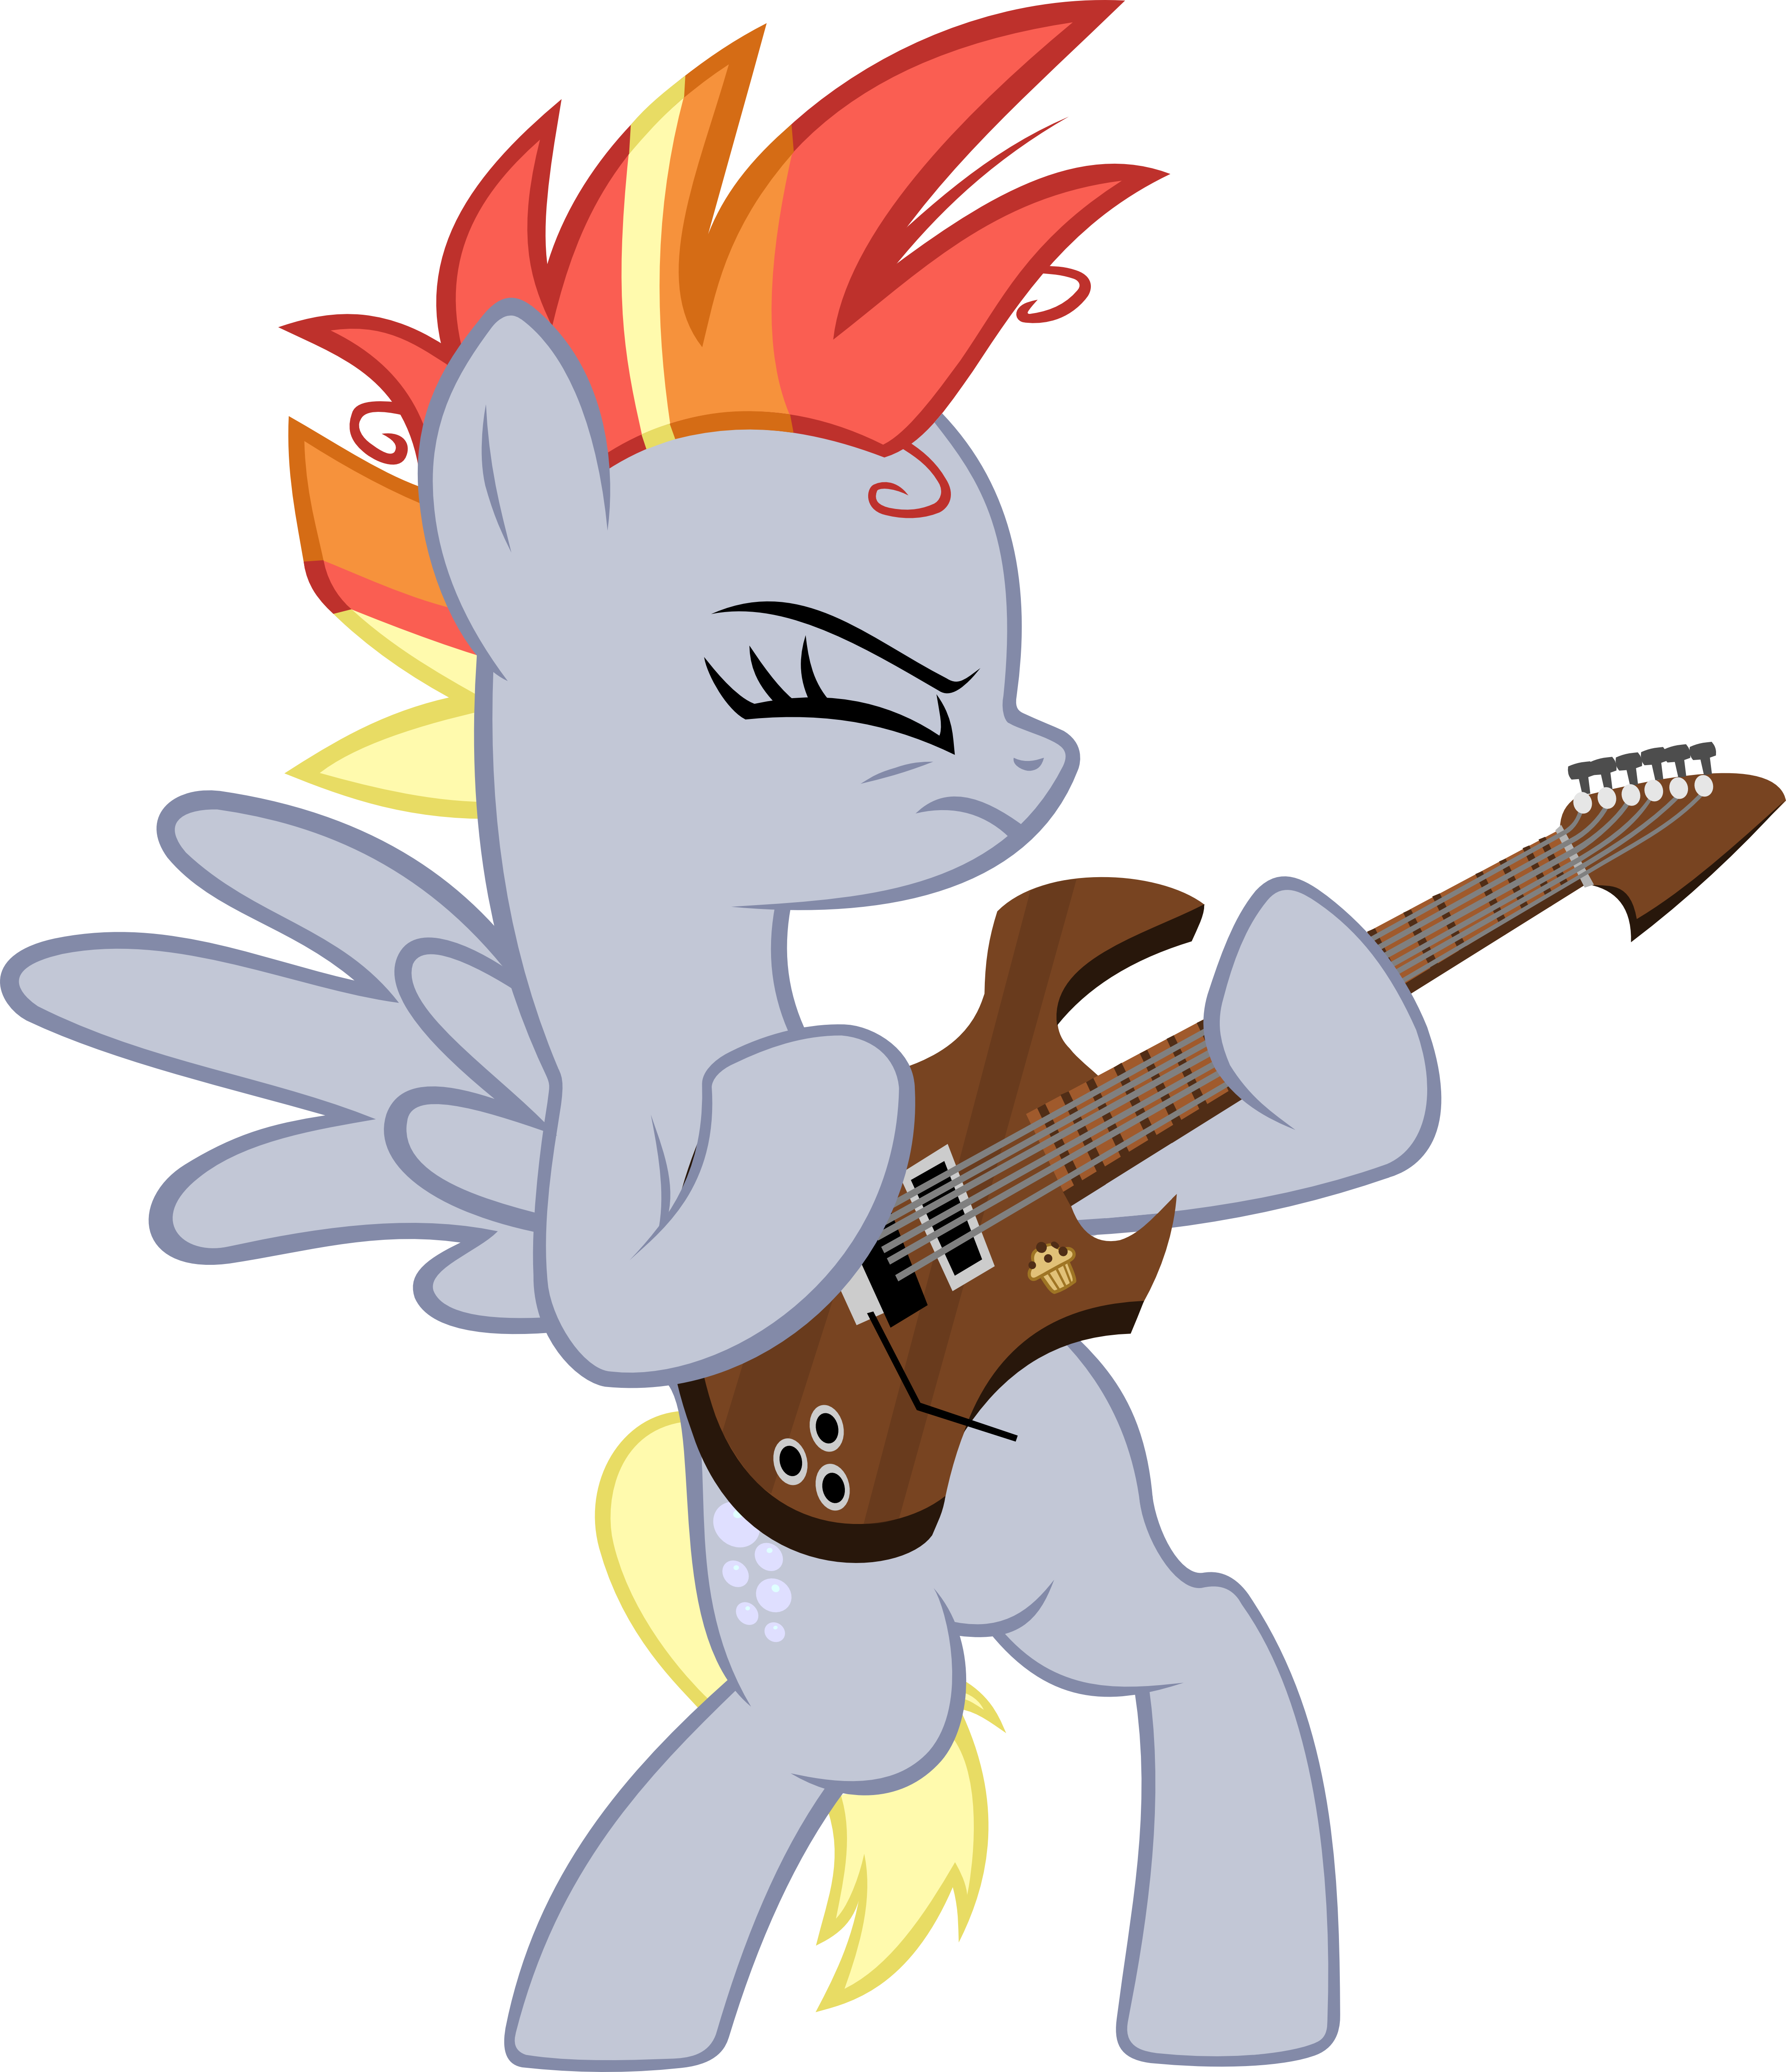 punker_hooves_by_ironm17-dbtjd50.png